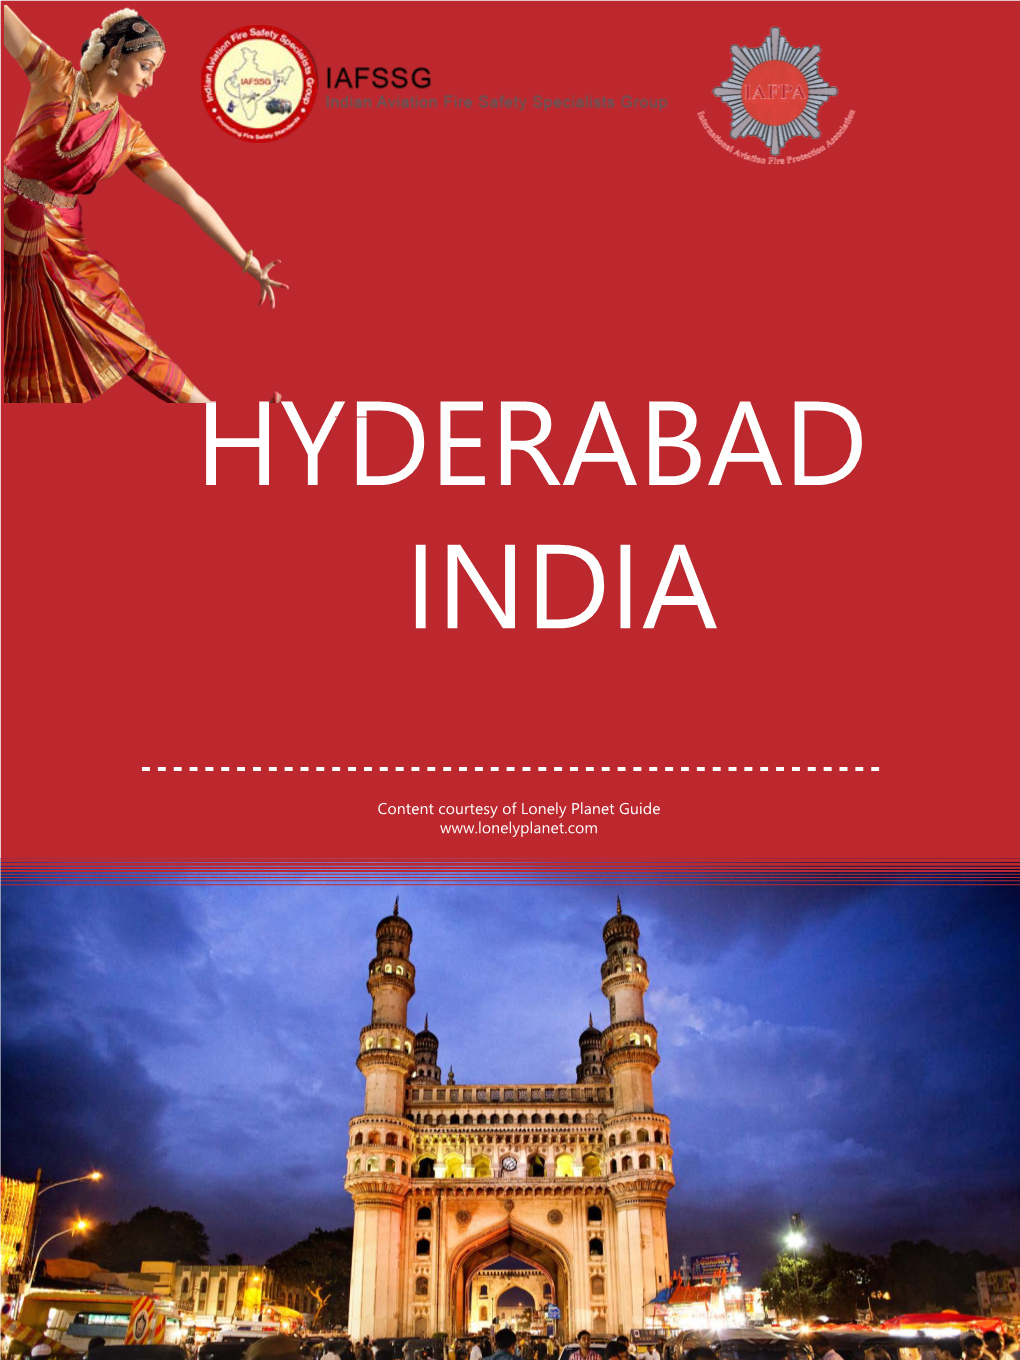 Content Courtesy of Lonely Planet Guide Hyderabad Is Reminiscent of Its Illustrious and Opulent Past When the Qutb Shahi Dynasty Reigned